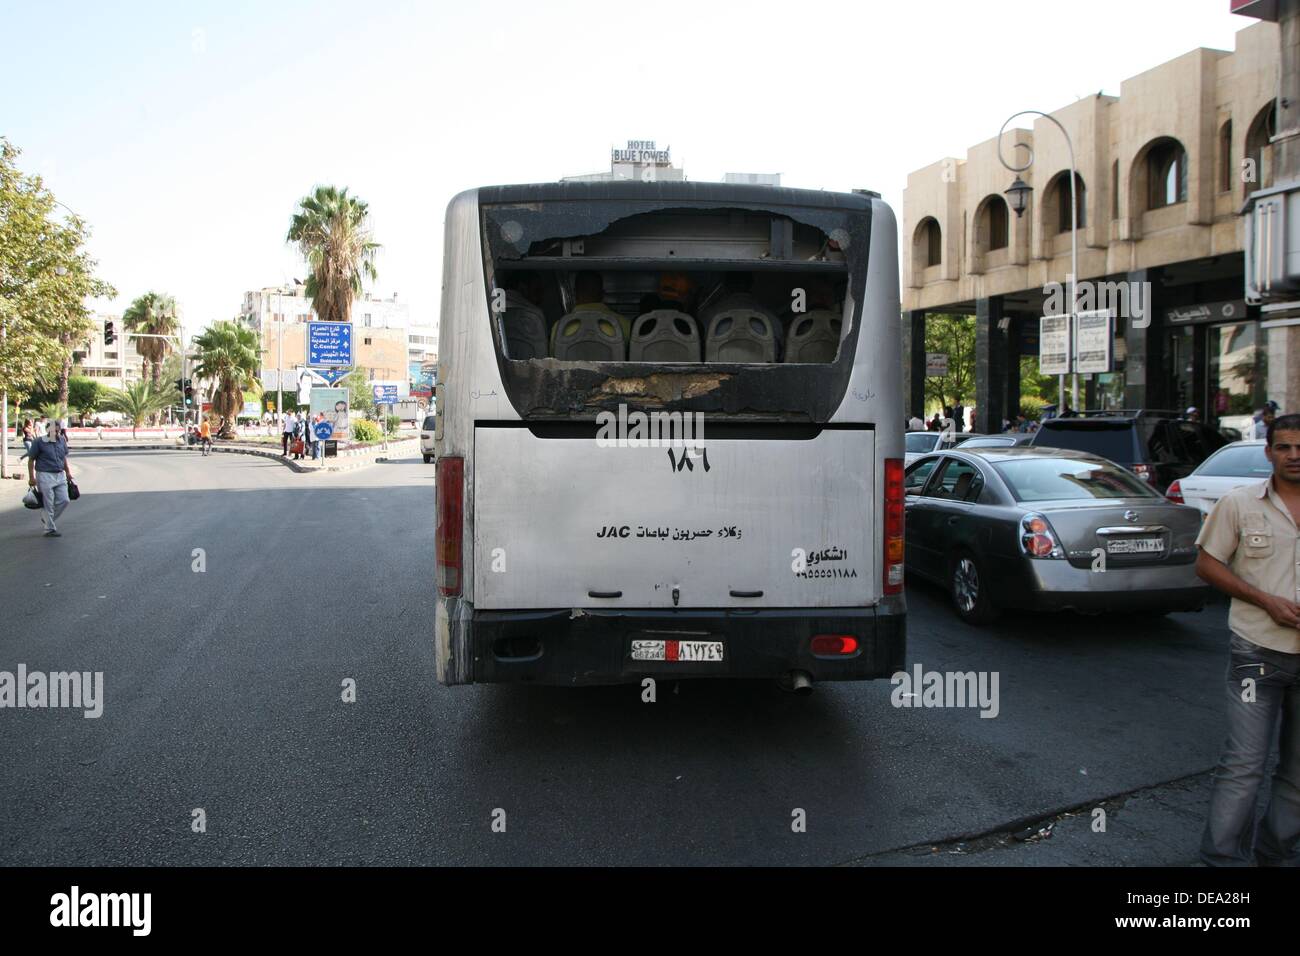 broken public bus still operates in the streets of Damascus, Syria, on 2013-09-14. Stock Photo